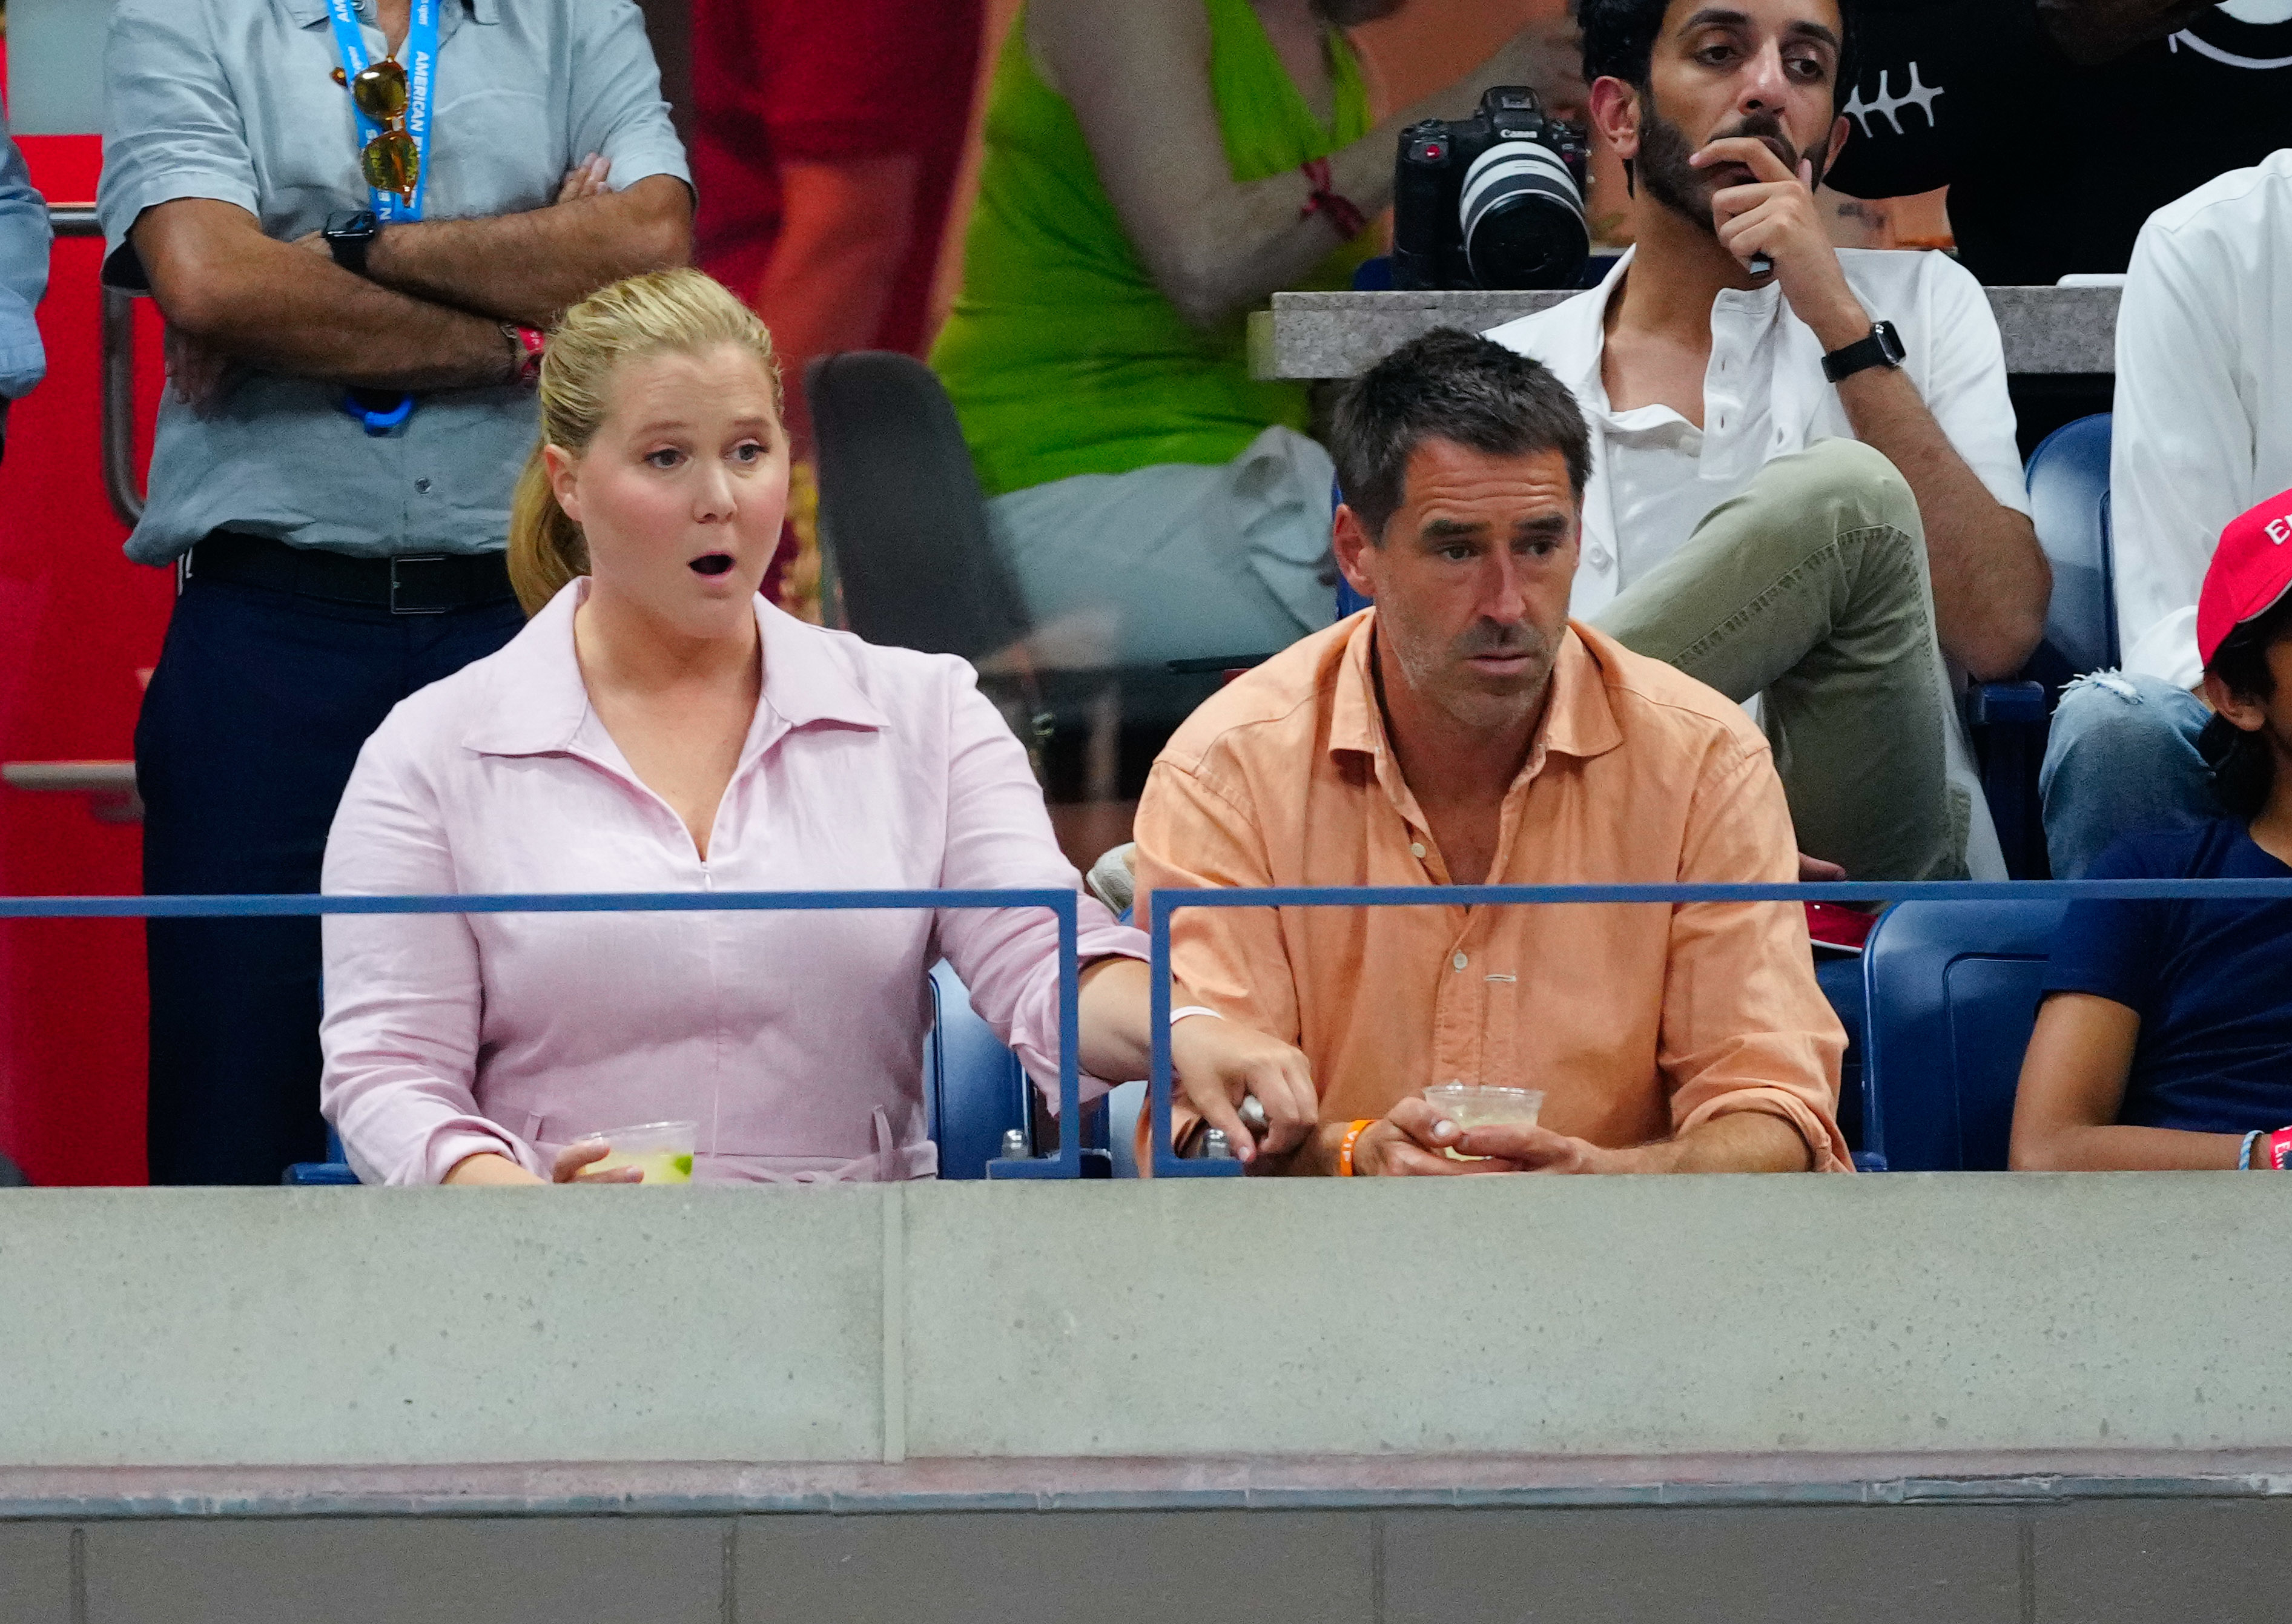 Amy Schumer looking astonished watches the match with her husband Chris Fischer